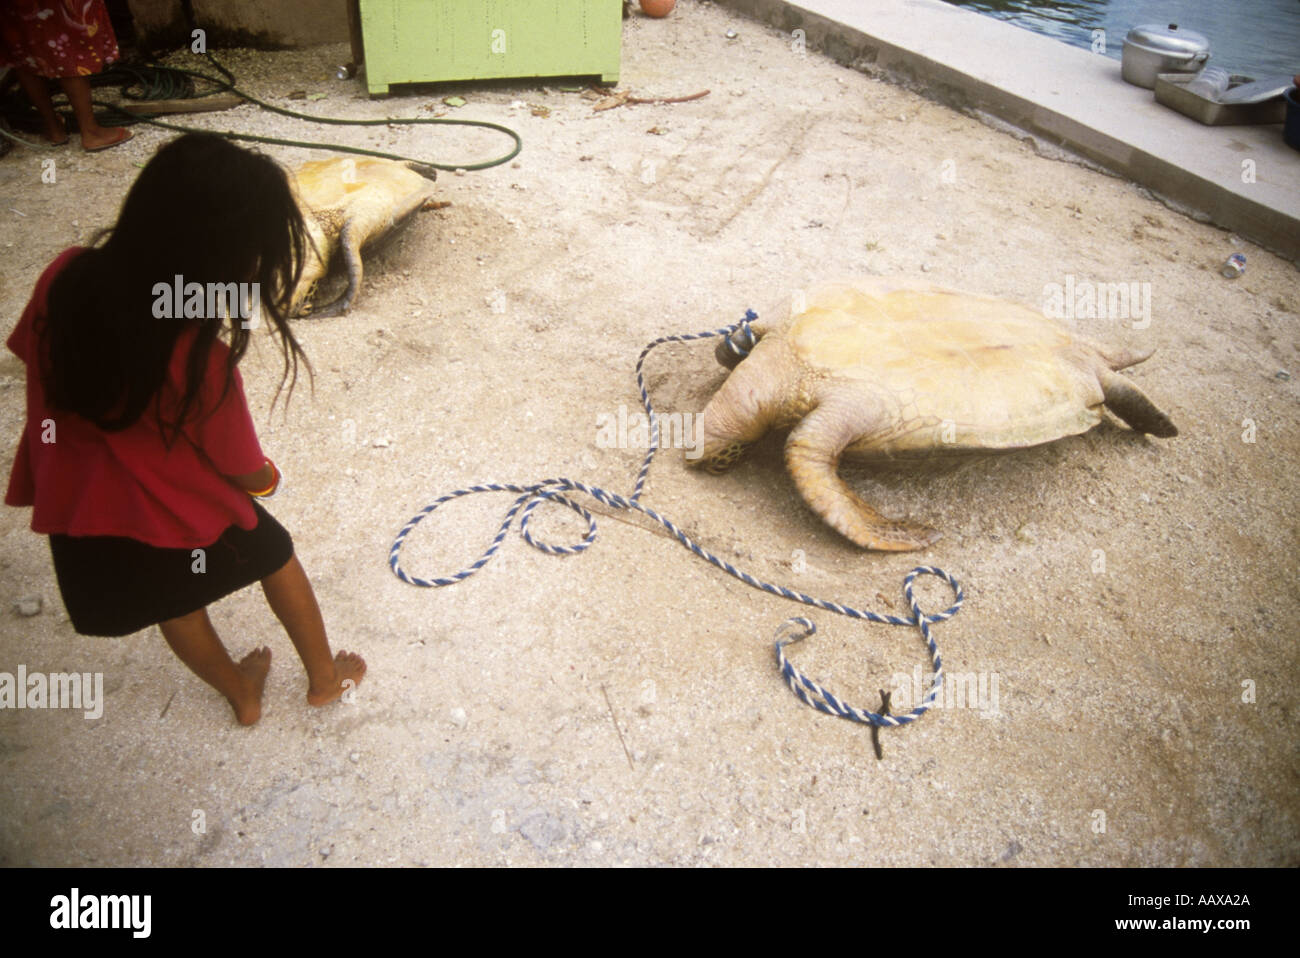 girl and turtles caught for food in the western pacific Matt Harris Stock Photo